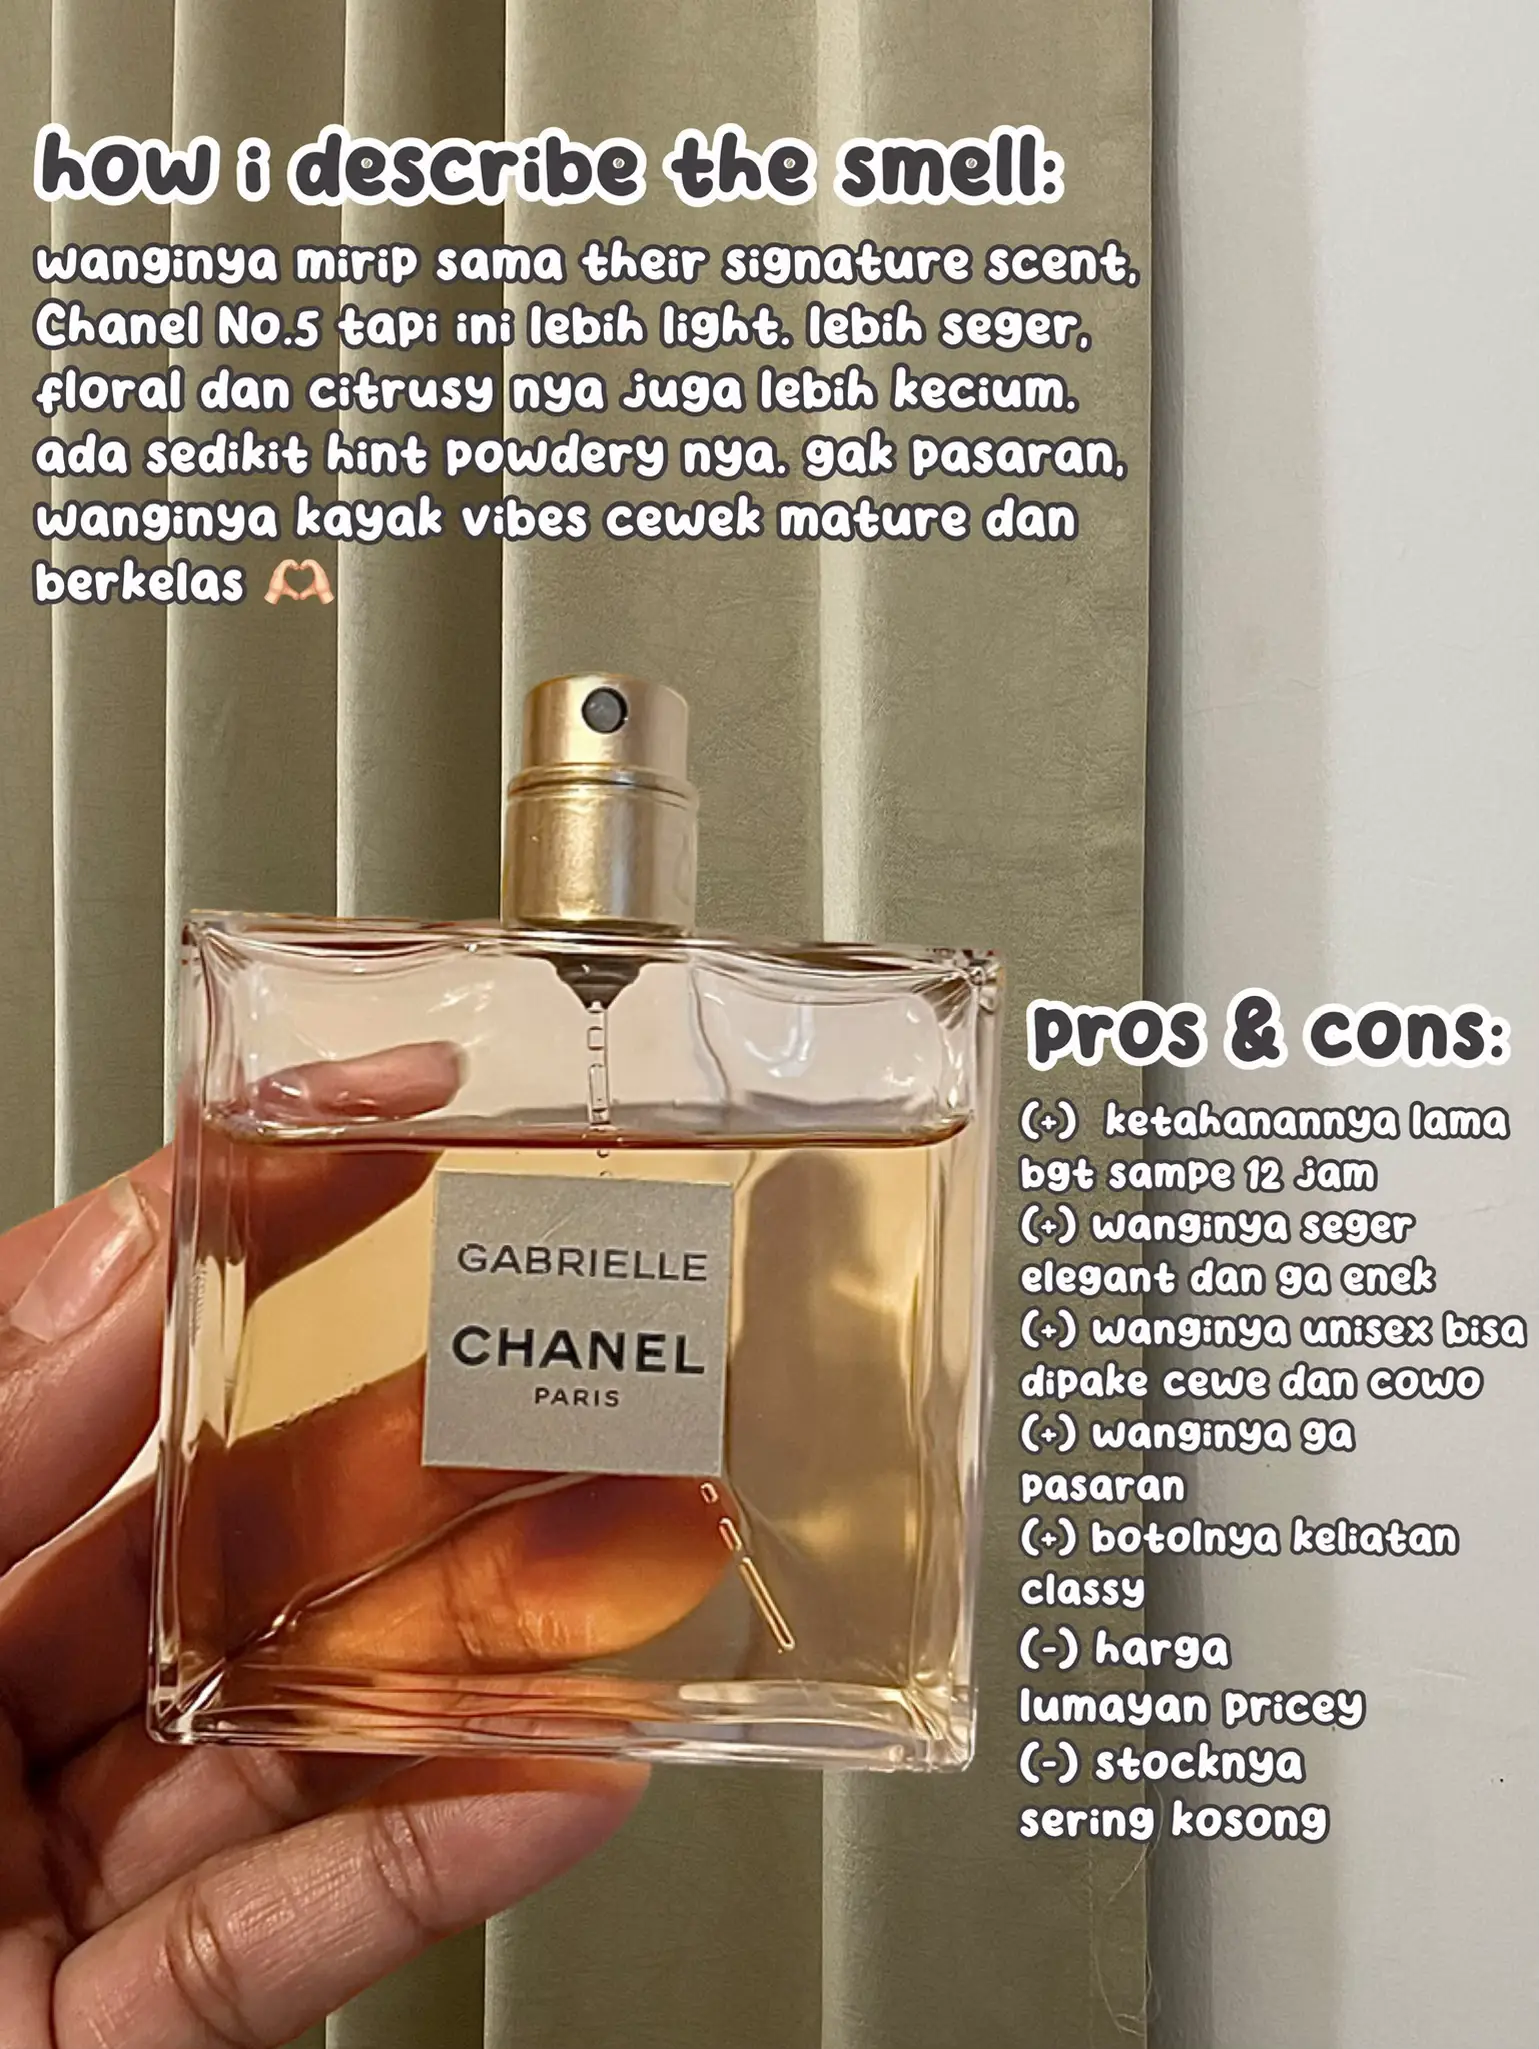 SAVE] Review Parfum INTJ Chanel Gabrielle 🖤⚜️, Gallery posted by Putri  A.